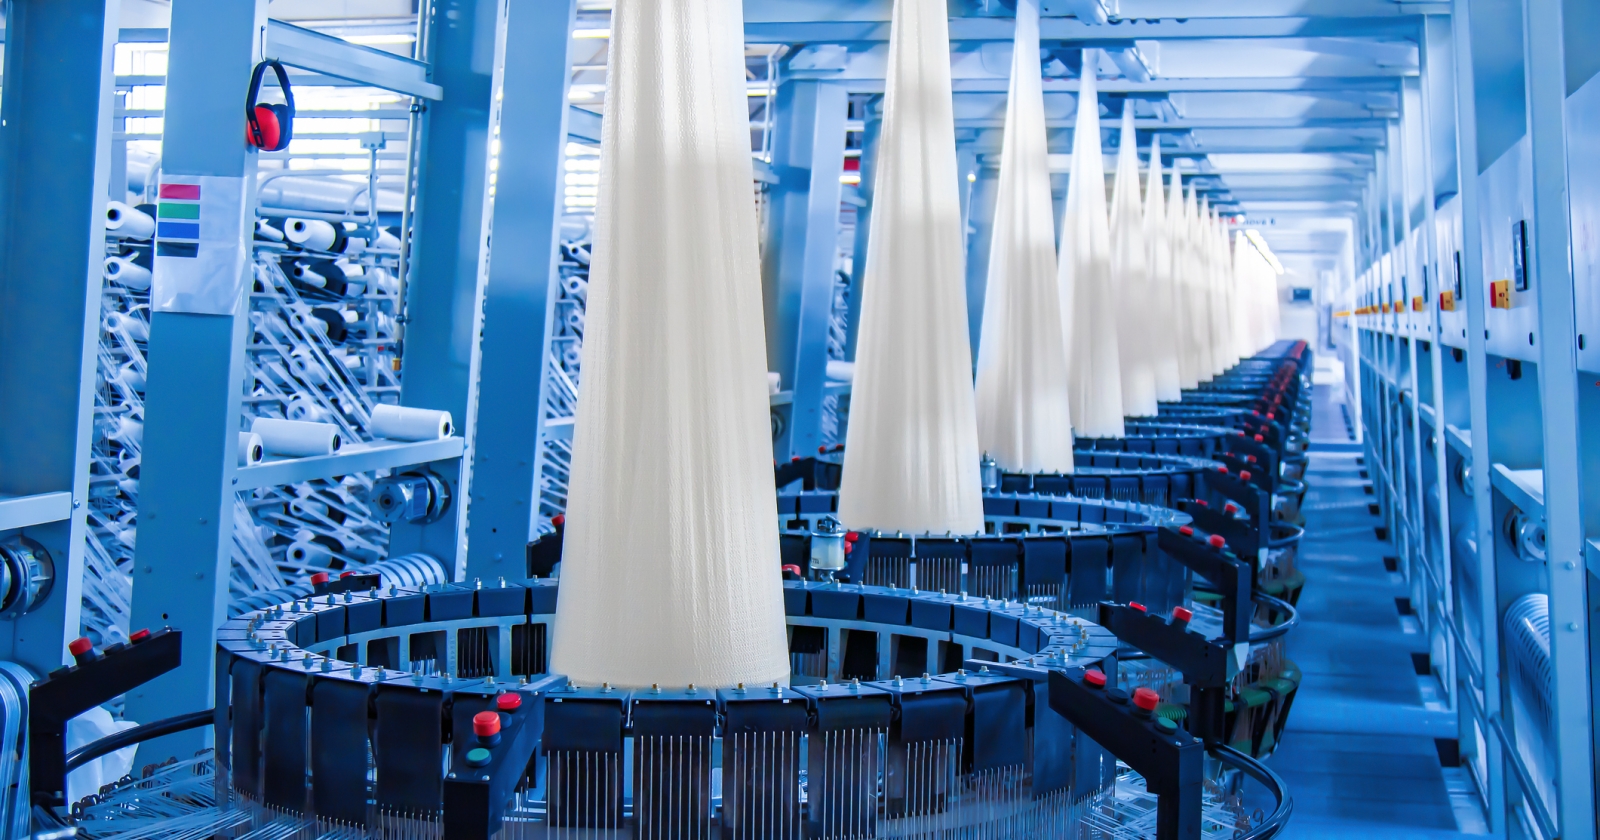 Production of white polypropylene flat yarn for the production of industrial bags. Allison-circular loom woven bag machine. Production of polypropylene sleeves.